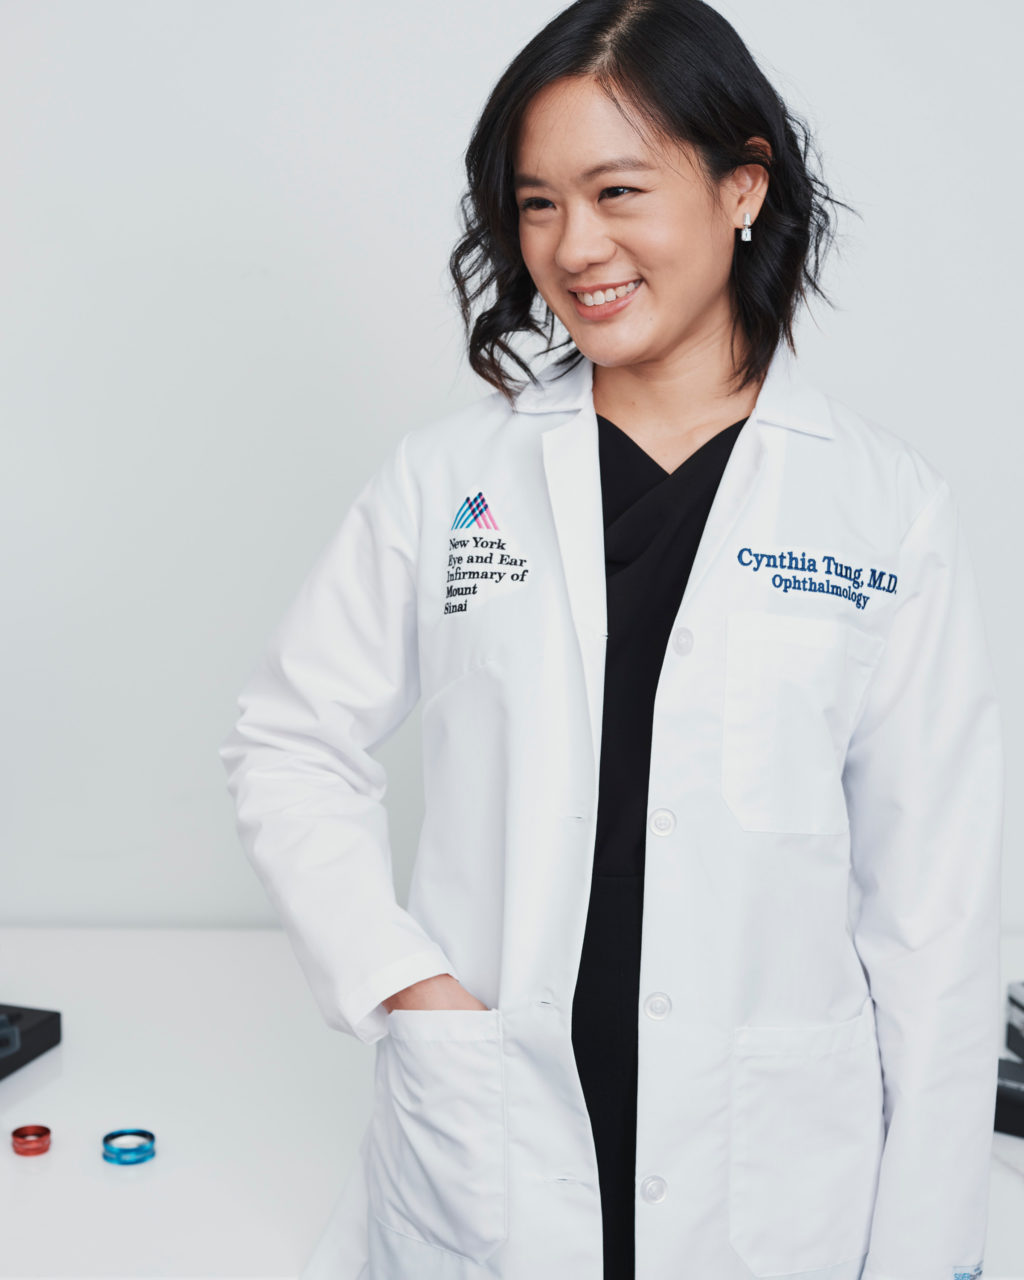 Dr. Cynthia Tung wears a black skirt, black top and her white lab coat. 